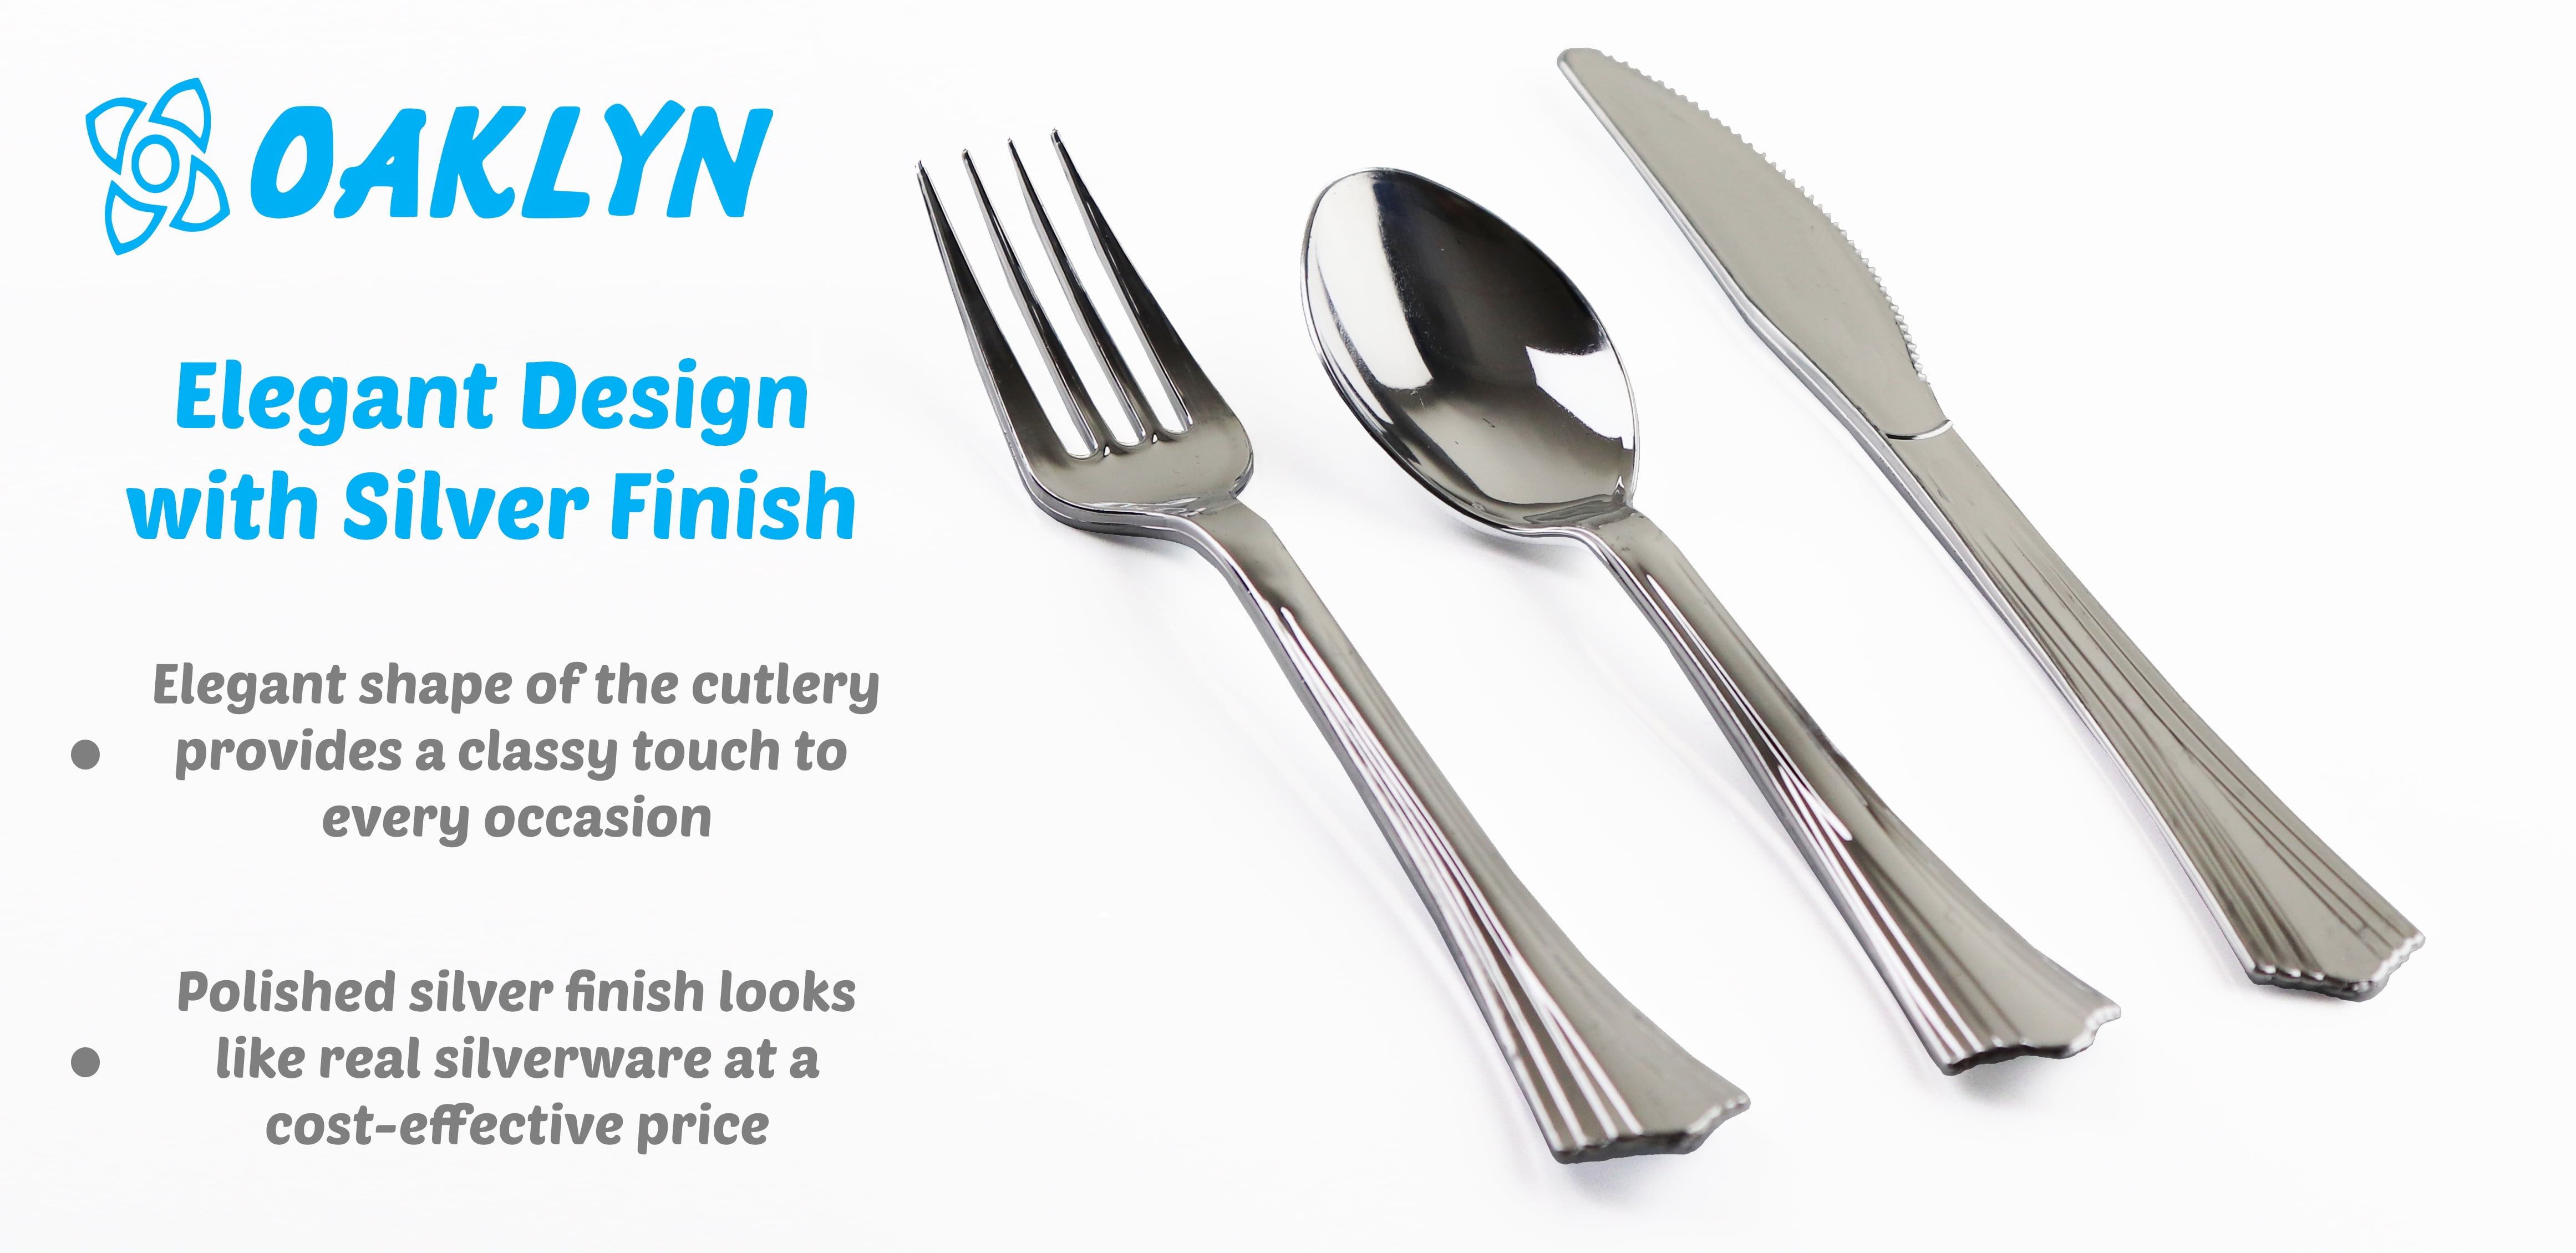 Looking to Buy New Flatware This Year. Discover Why Cambridge is the Clear Choice